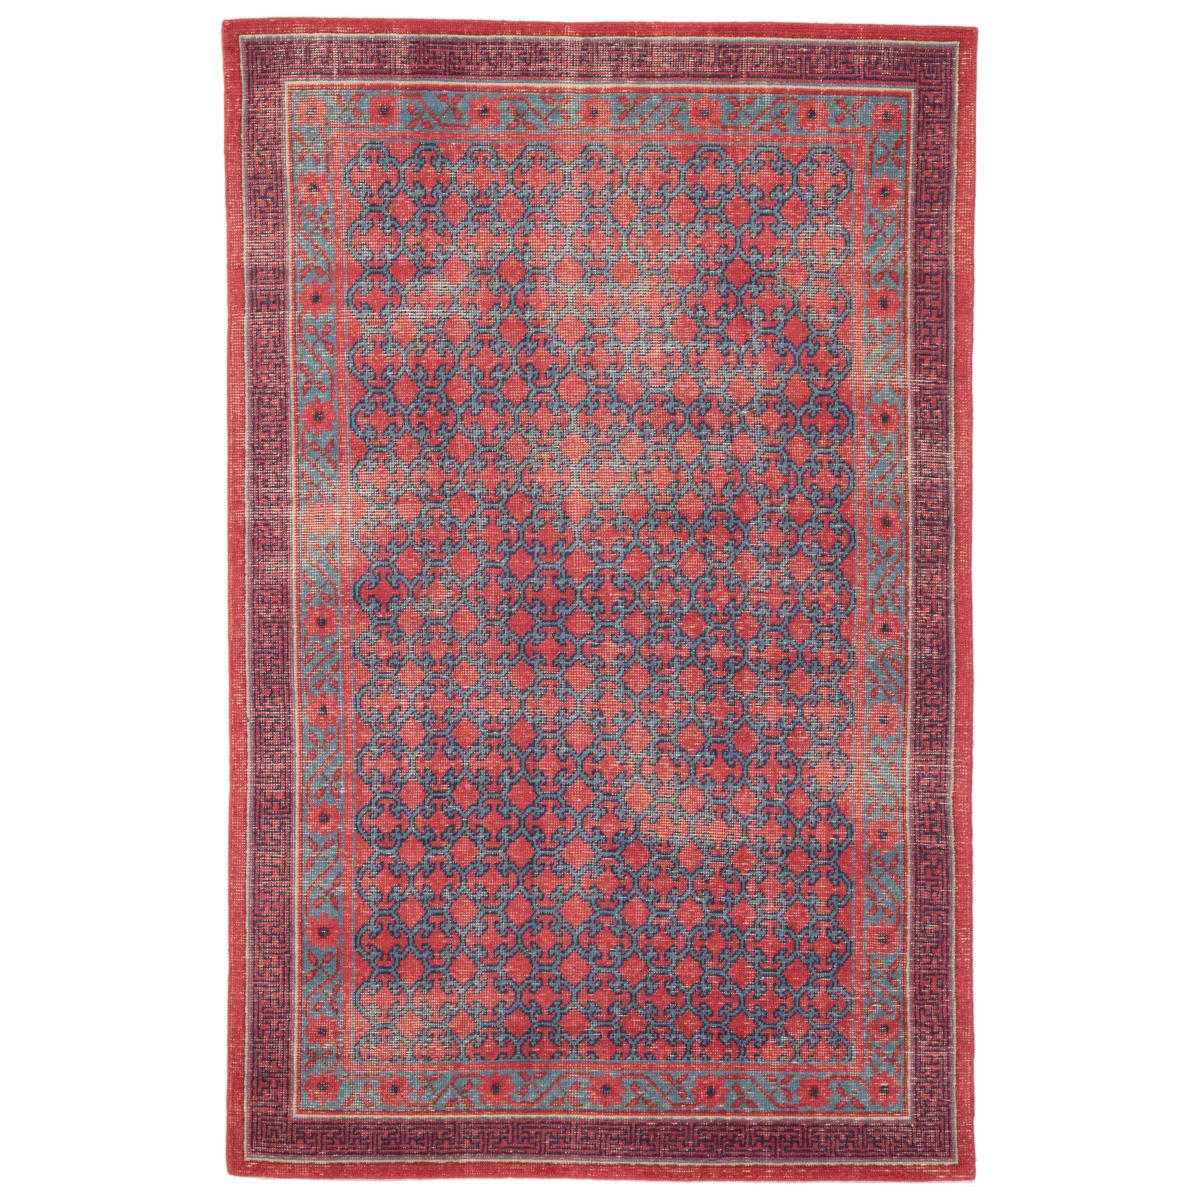 Rug129729 2 X 3 Ft. Revolution Concord Hand-knotted Medallion Red & Blue Area Rug